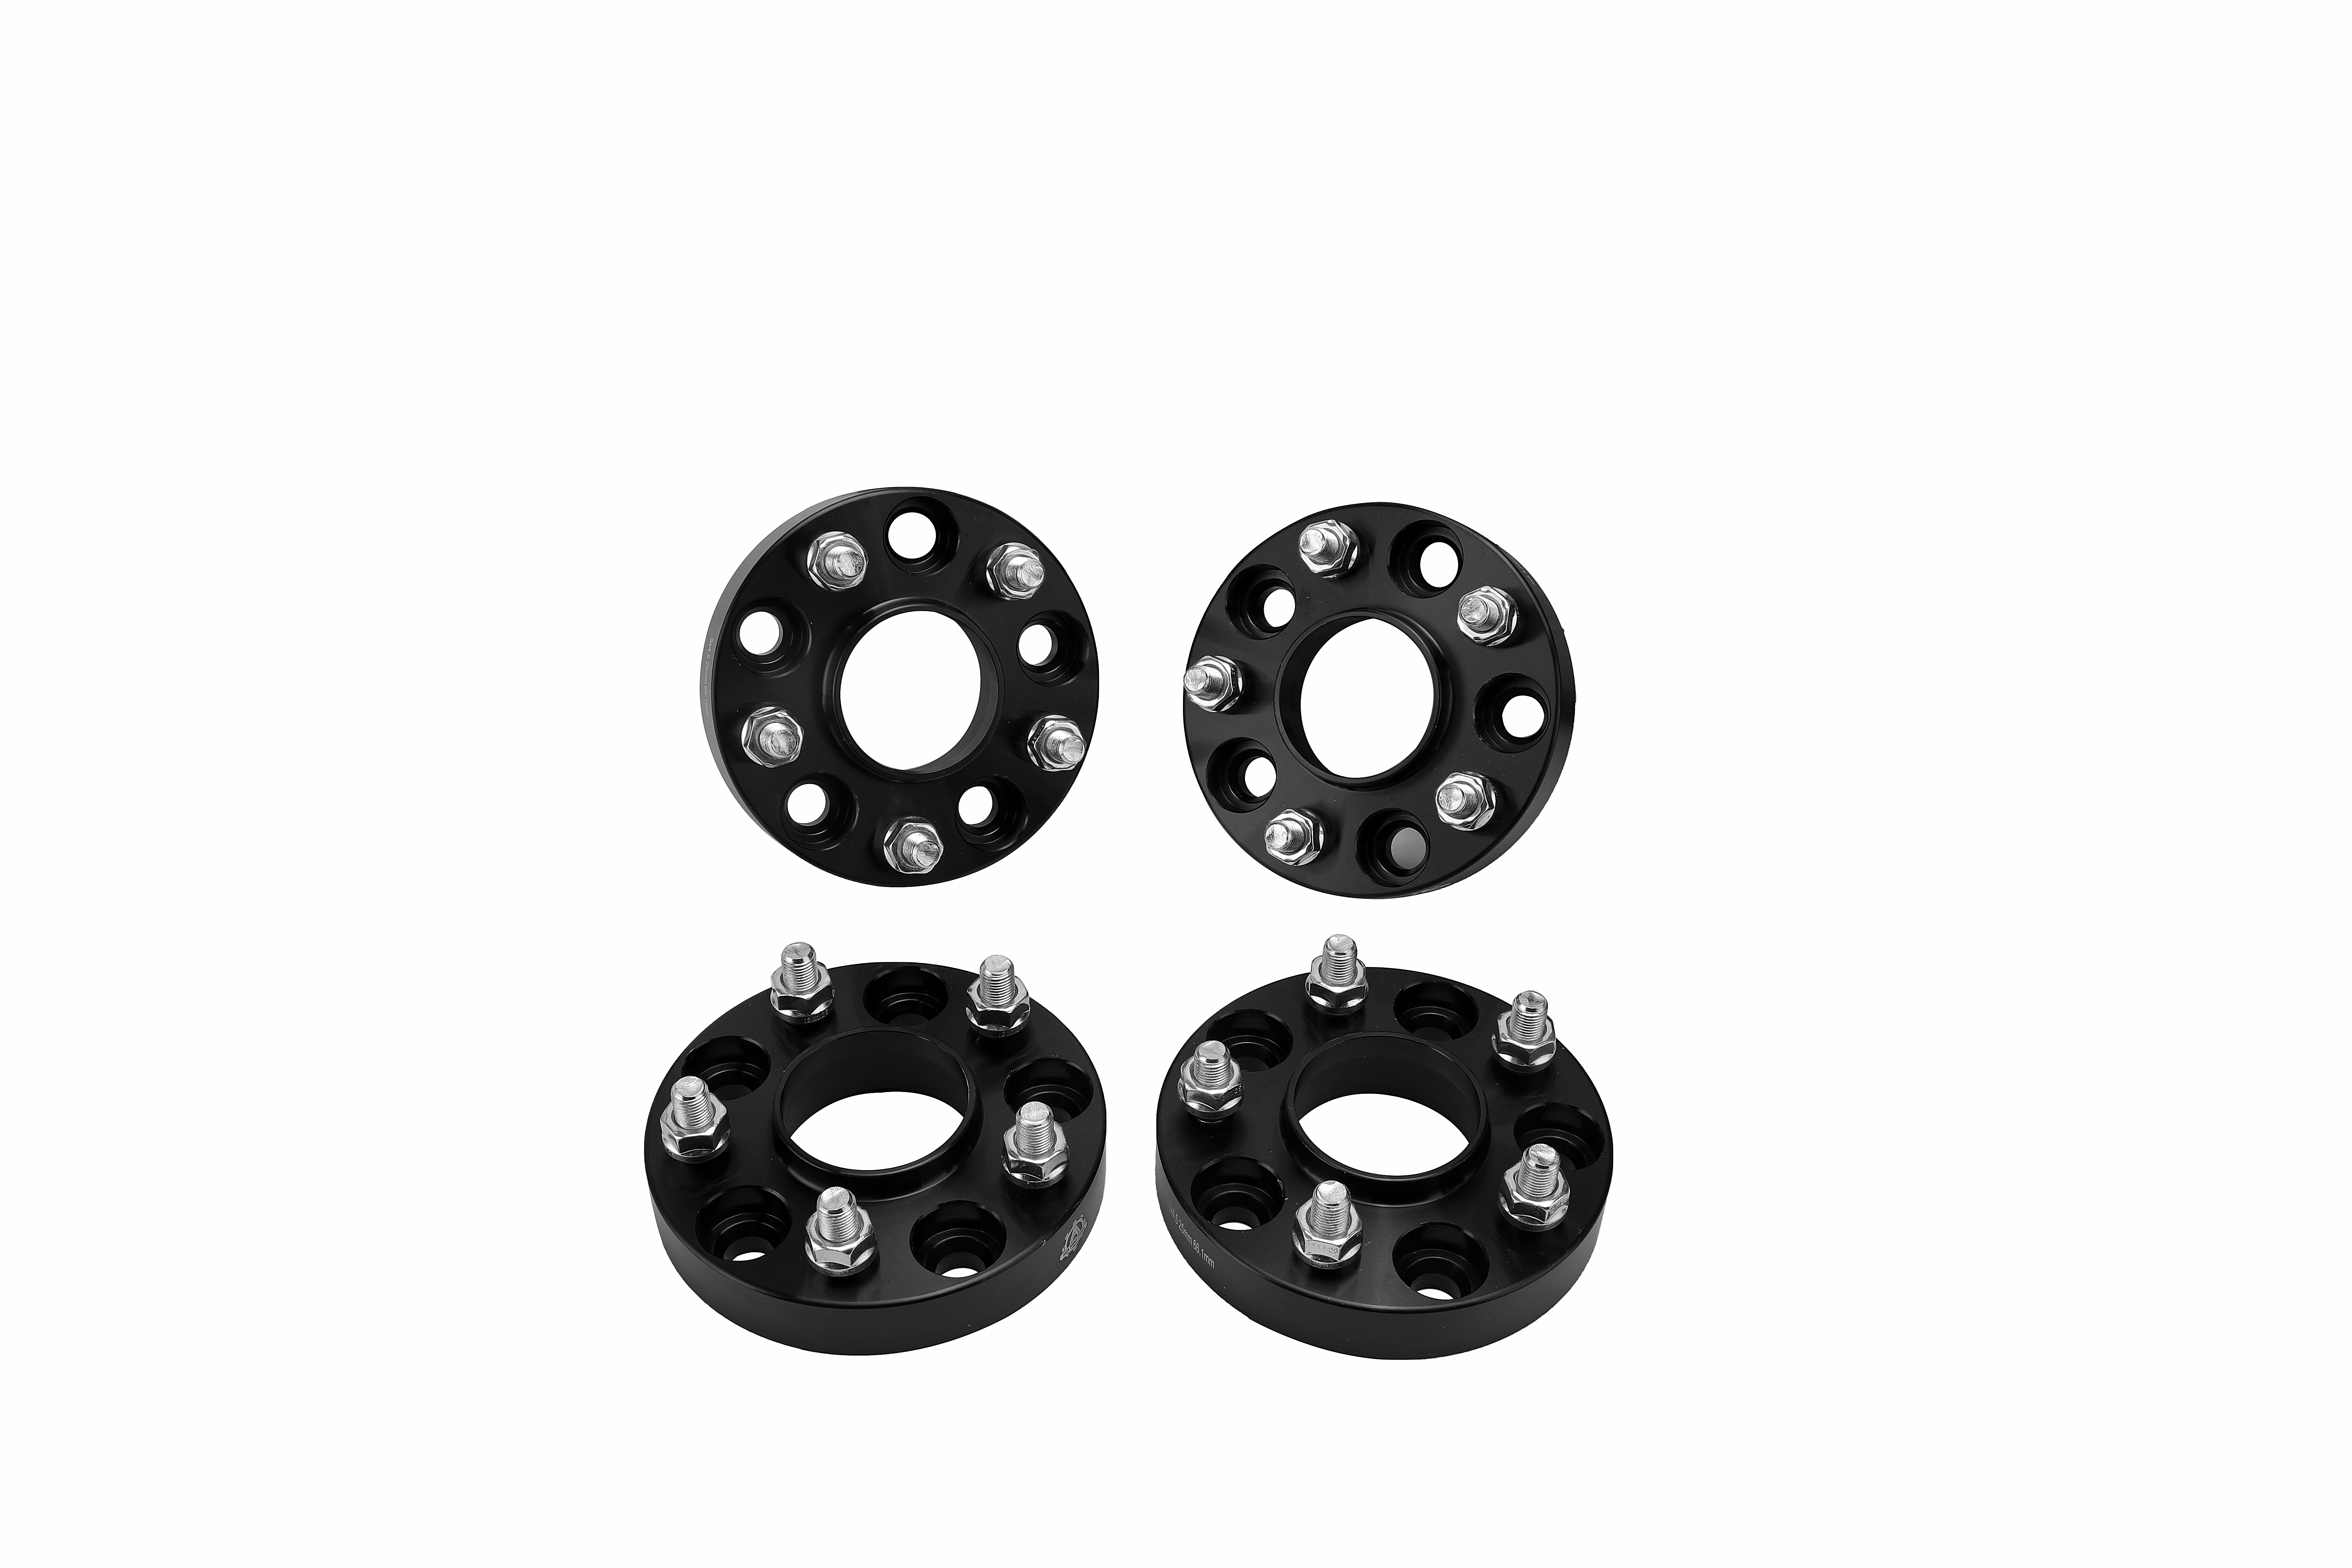 Wheel Spacer Set of 4 - 1 inch Thick 25mm Wheel Hub Centric 5x114.3mm - Fits Nissan Image